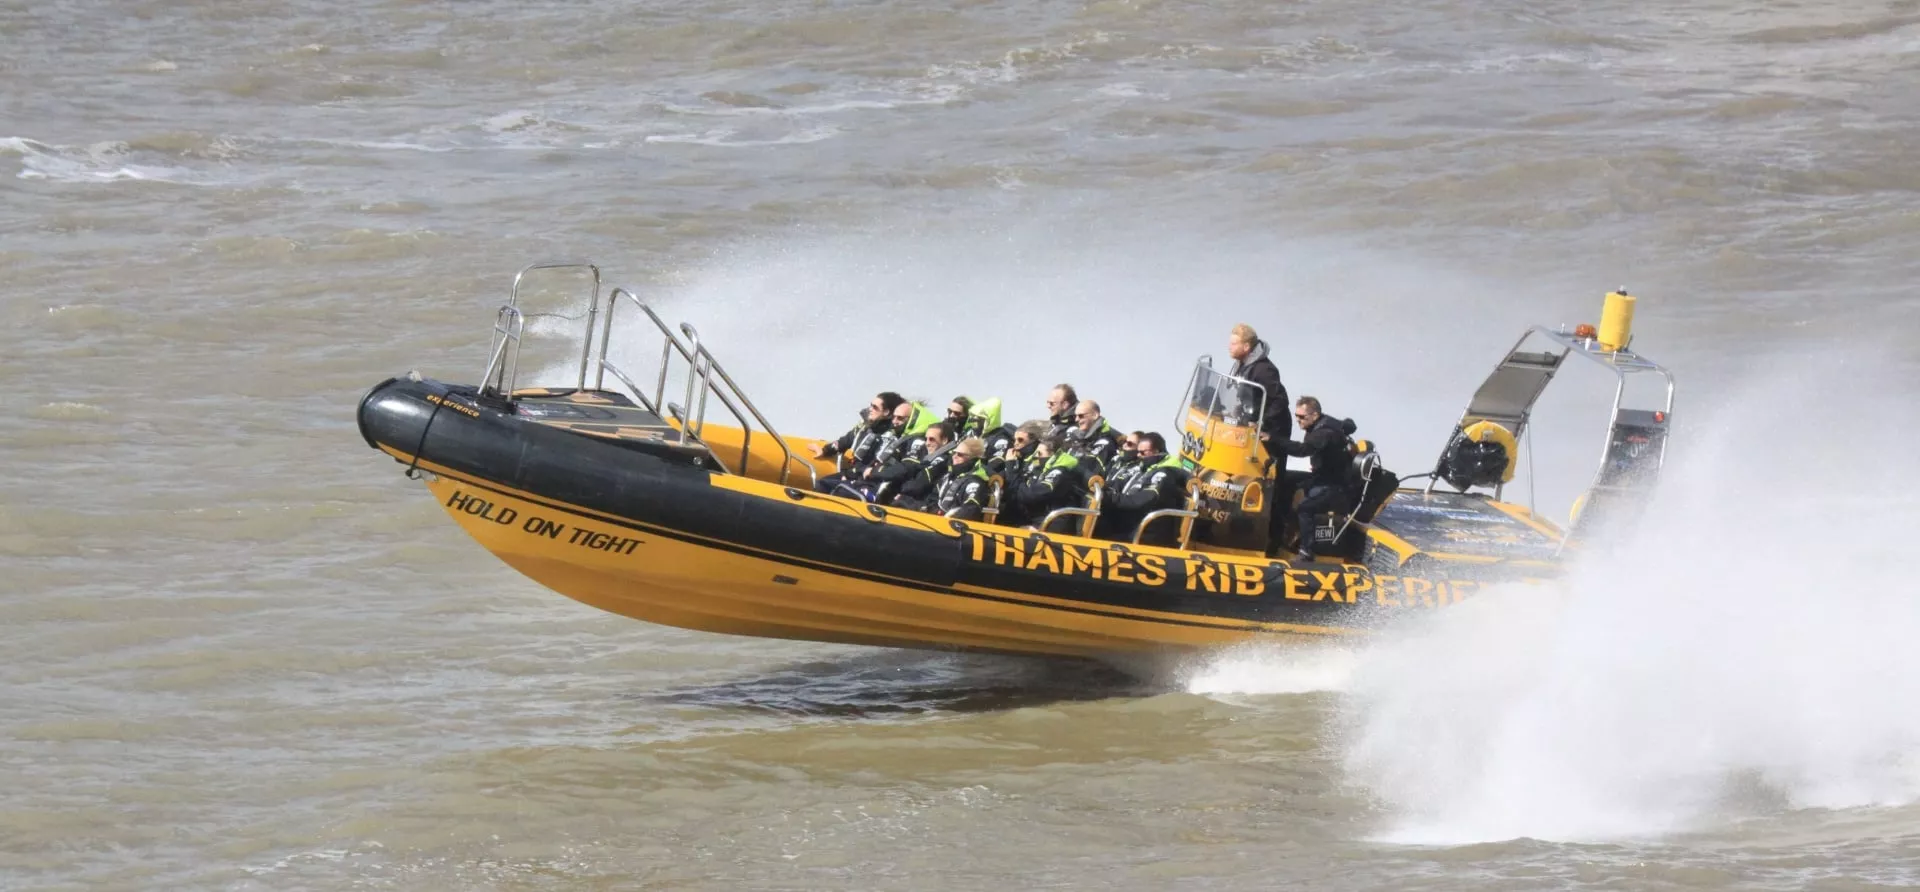 Thames RIB Experience in United Kingdom, Europe | Speedboats - Rated 1.3